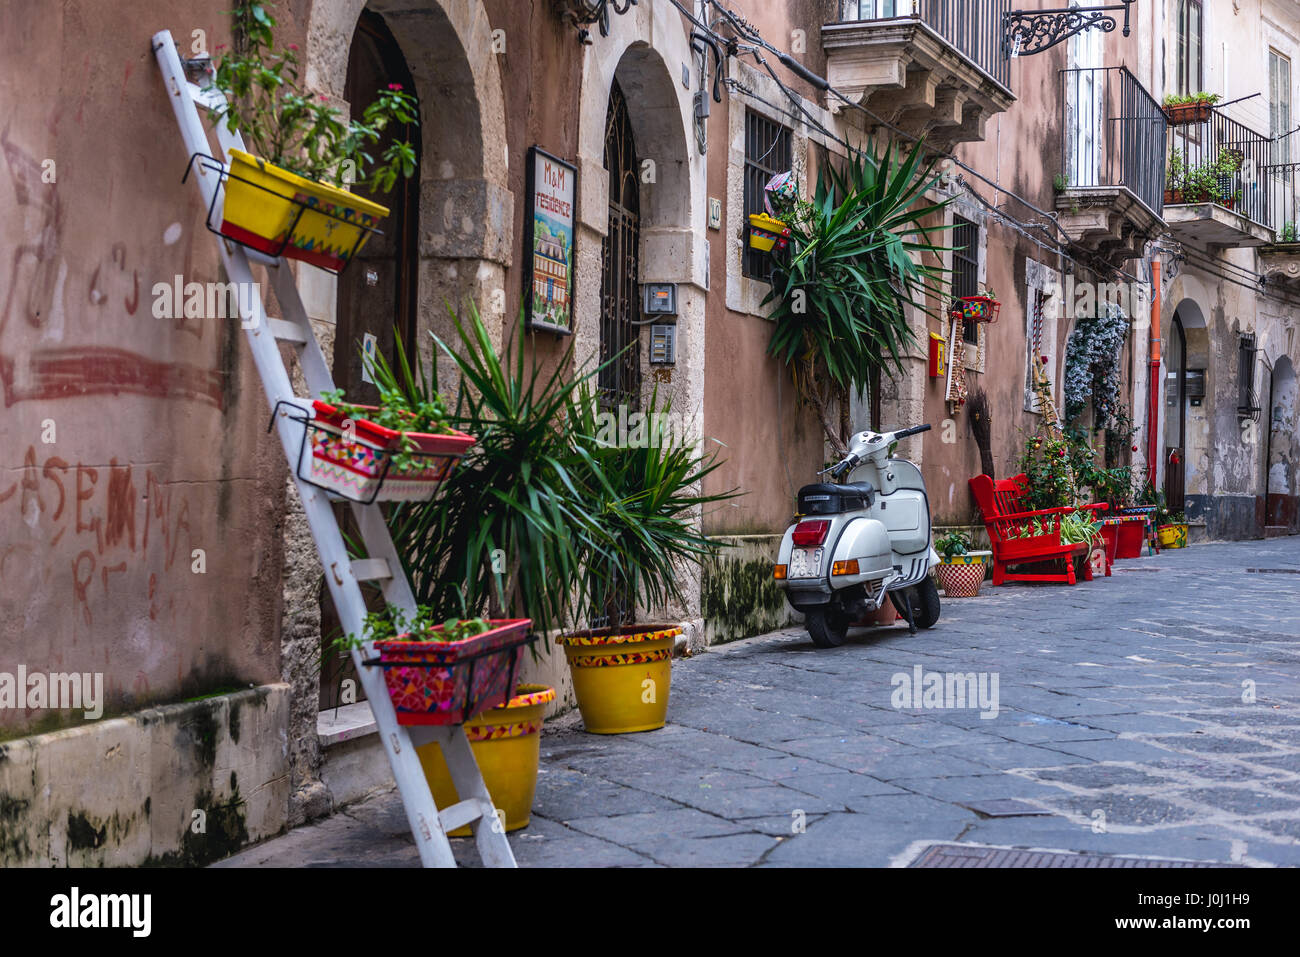 Green plants on a narrow street on the Ortygia island, historical part of Syracuse city, southeast corner of the island of Sicily, Italy Stock Photo